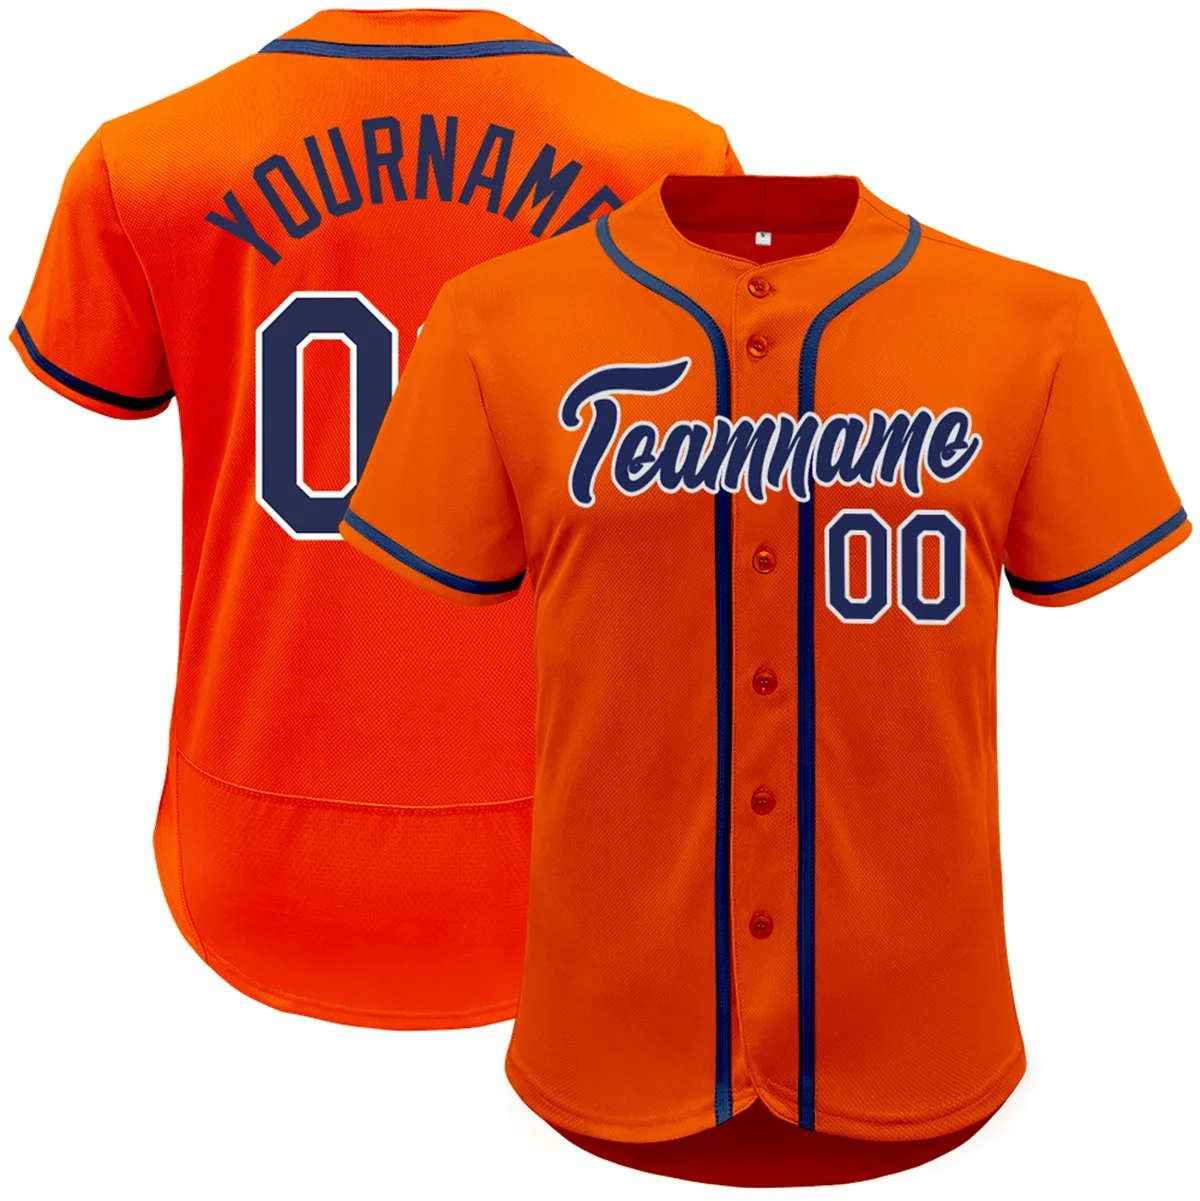 Custom Baseball Jersey Printed Personalized Team Name/Numbers Baseball Shirts Sports Uniform for Men Boy Best for Game/Party